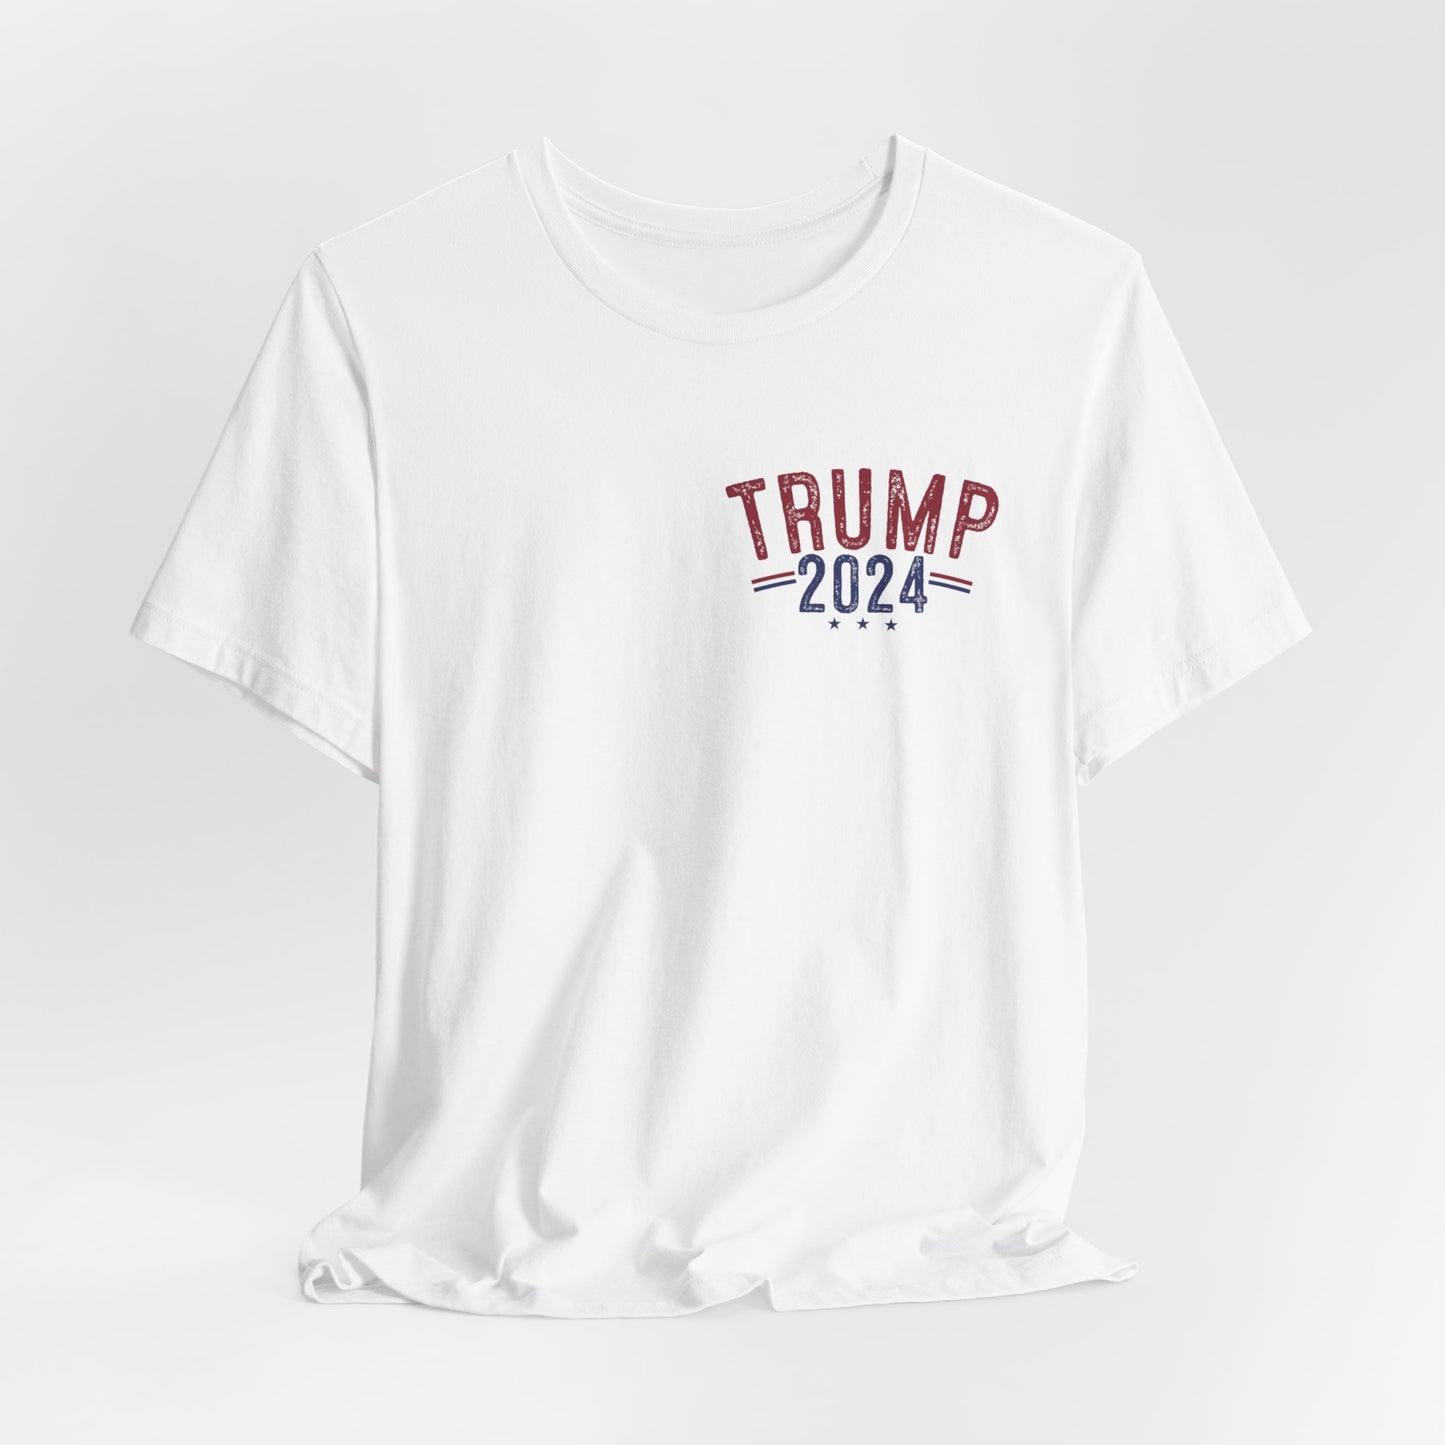 Trump President Election Front and Back Adult Unisex Short Sleeve Tee